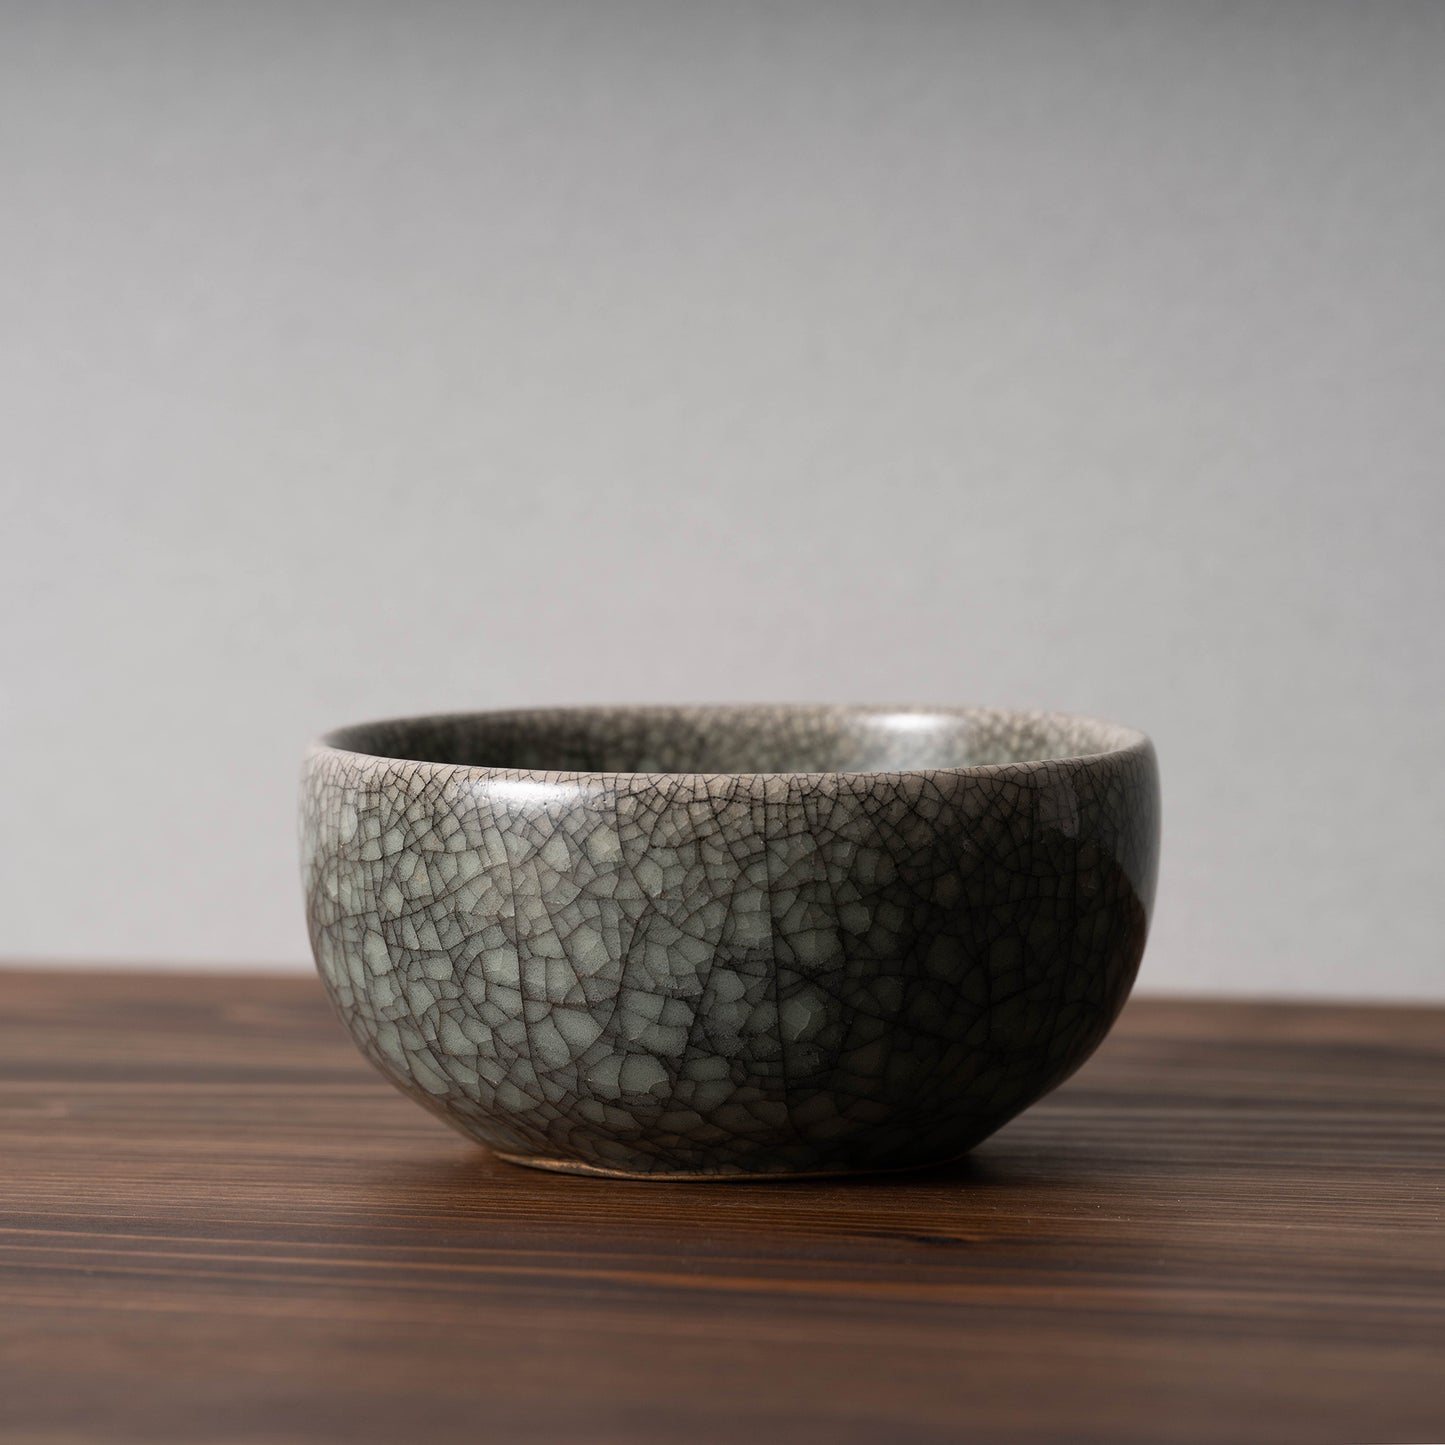 Southern Song Dynasty Celadon Teabowl